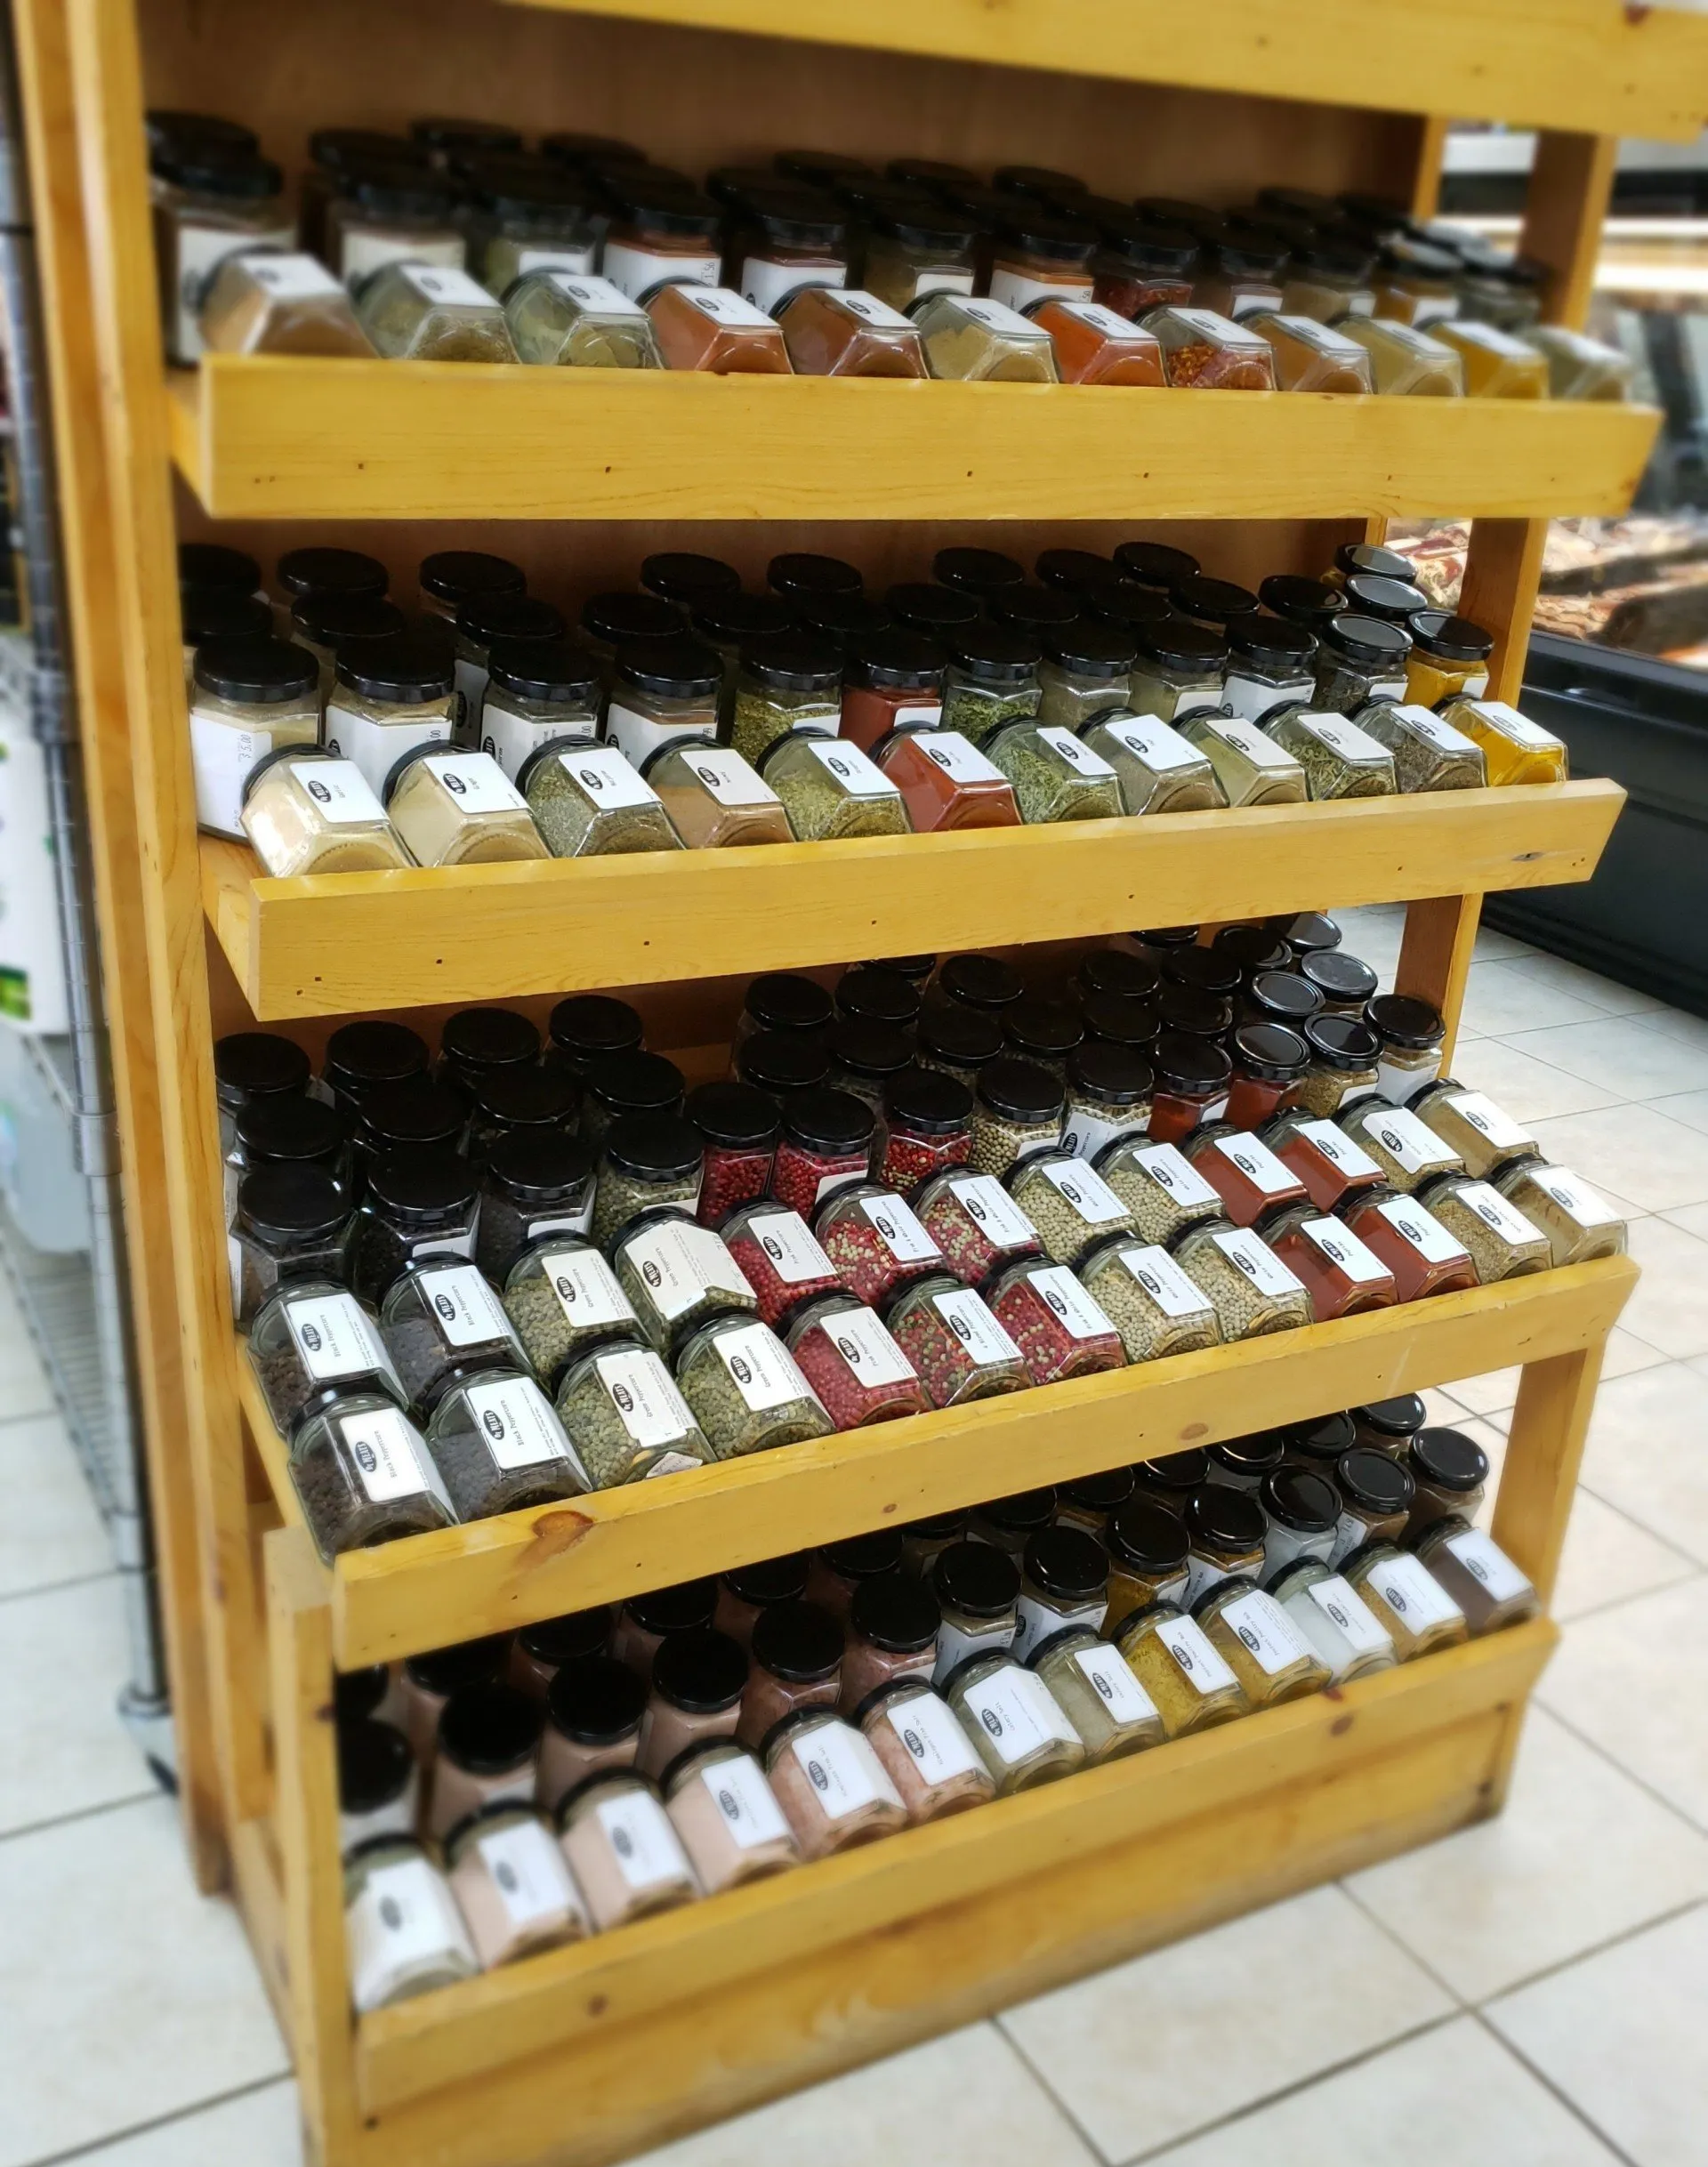 Spices on bottles